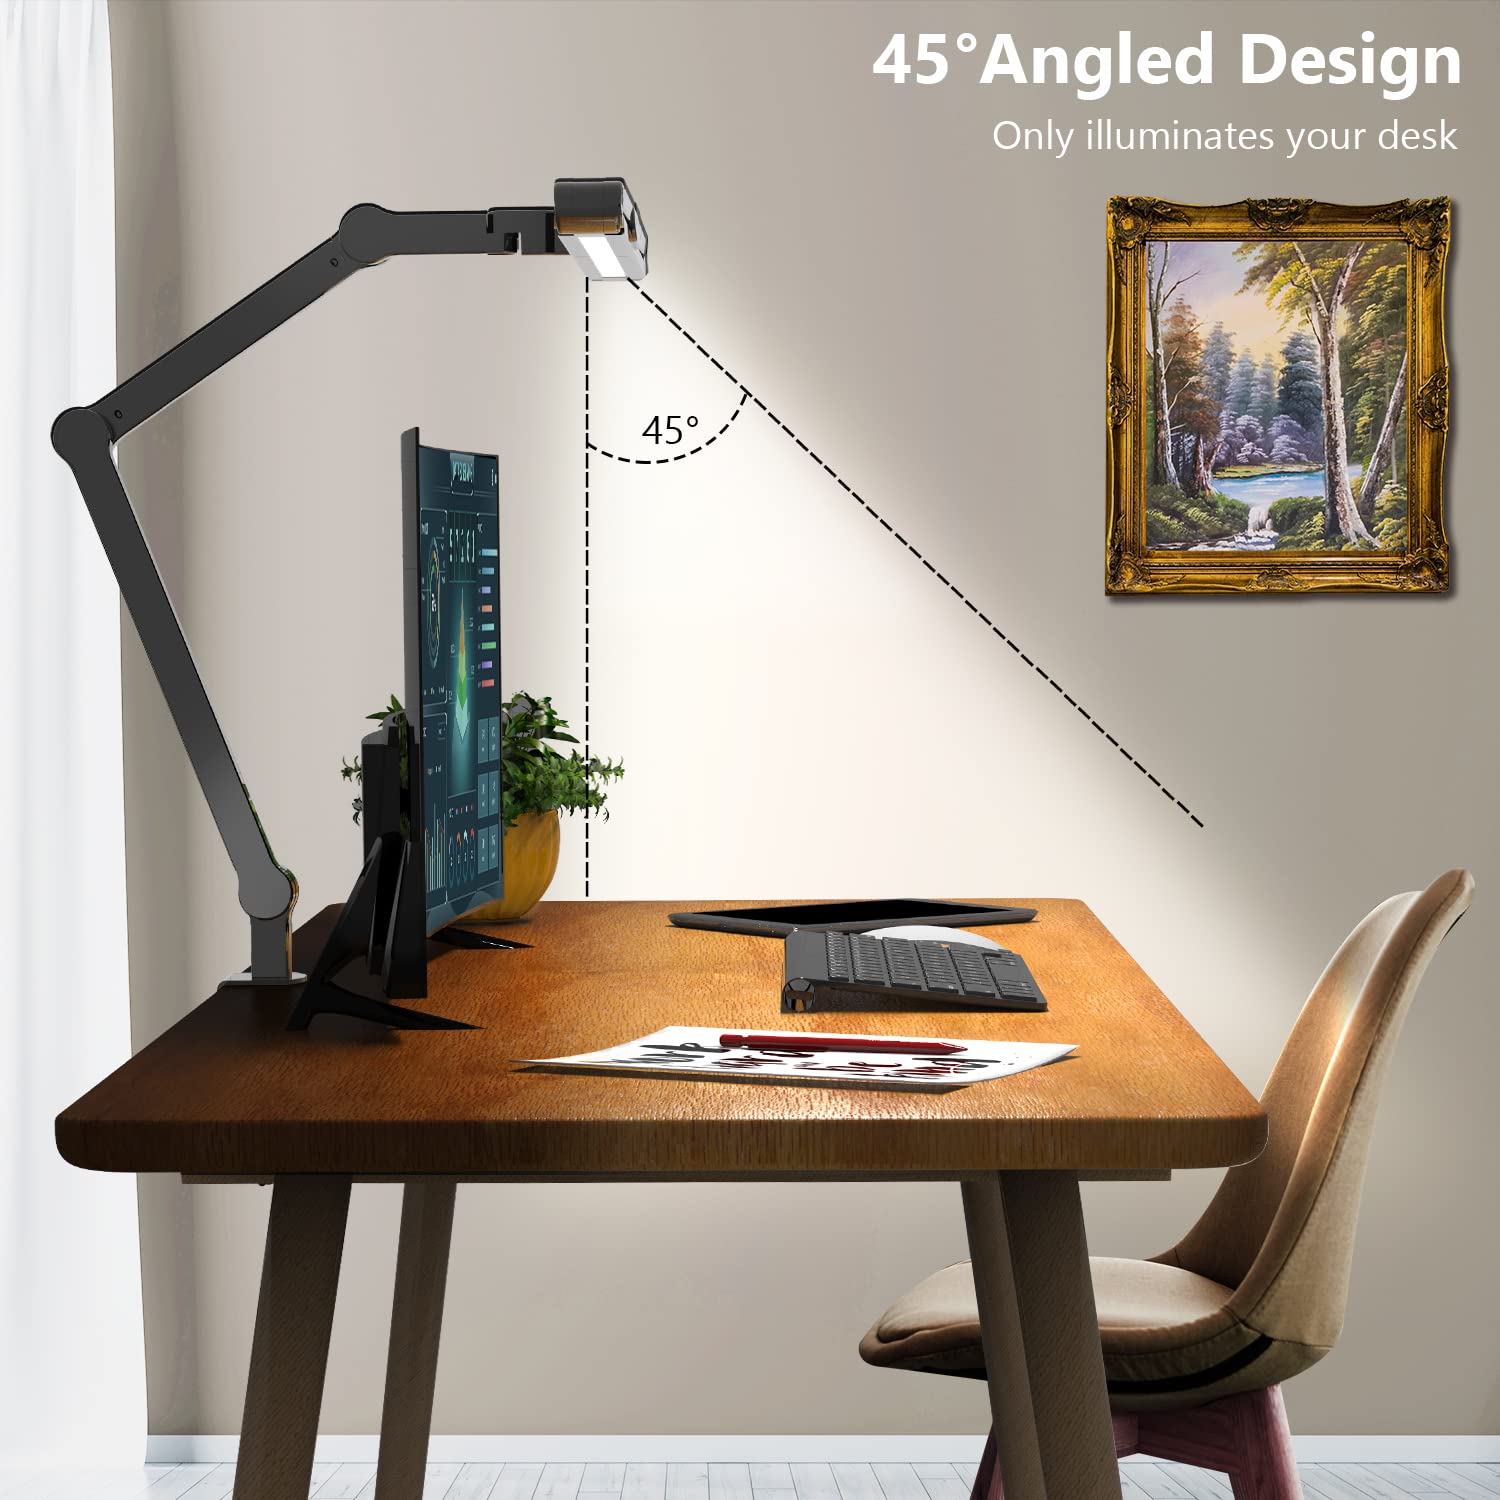 Micomlan Led Desk Lamp with Clamp, Architect Desk Lamp for Home Office with Atmosphere Lighting, 24W Ultra Bright Auto Dimming Desk Light Stepless Dimming and Tempering LED Table Light